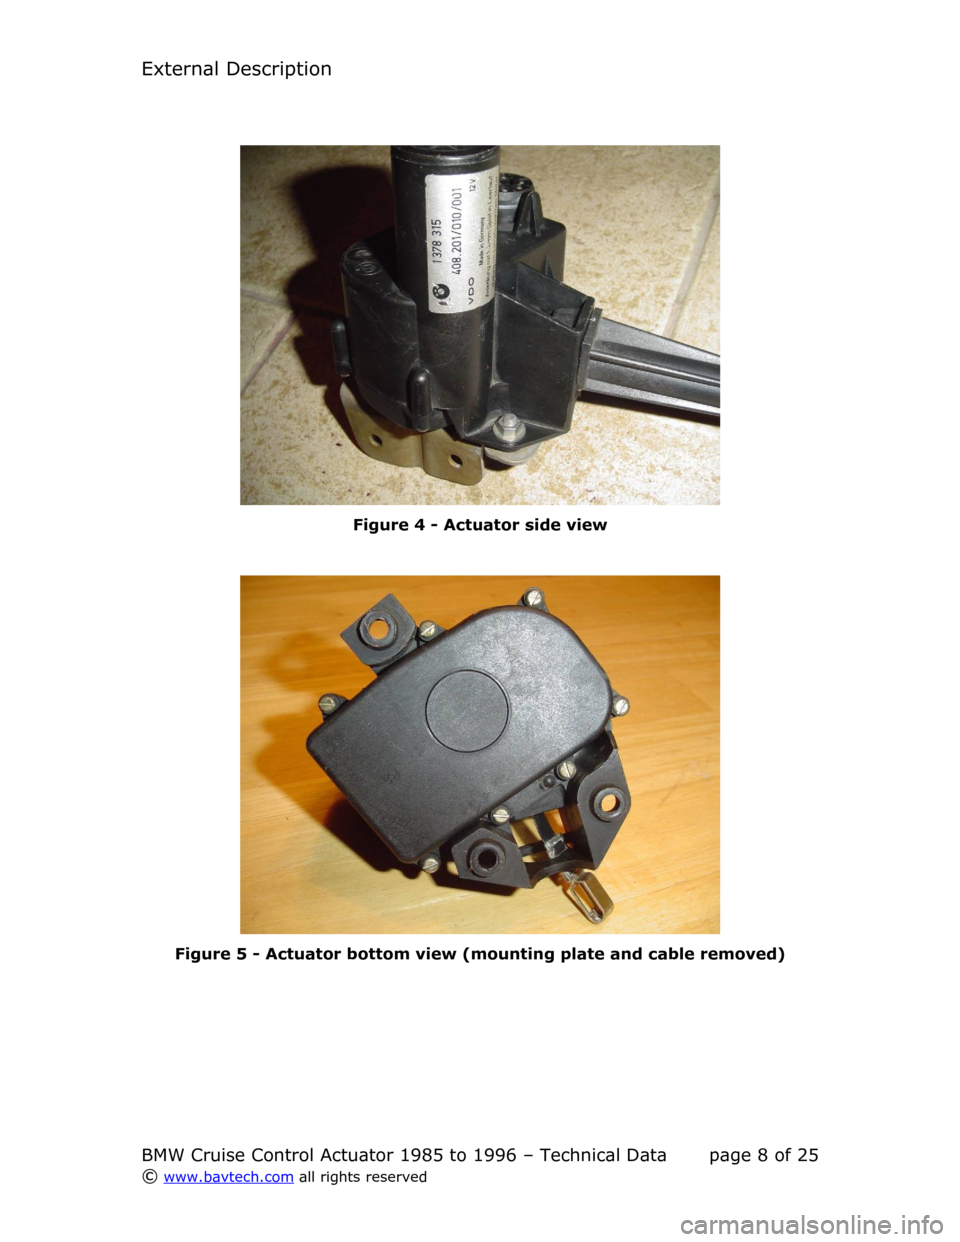 BMW 3 SERIES 1992 E36 Cruise Control Acutator External Description
Figure  4  - Actuator side view
Figure  5  - Actuator bottom view (mounting plate and cable removed)
BMW Cruise Control Actuator 1985 to 1996 – Technical Data page  8  of  25
©